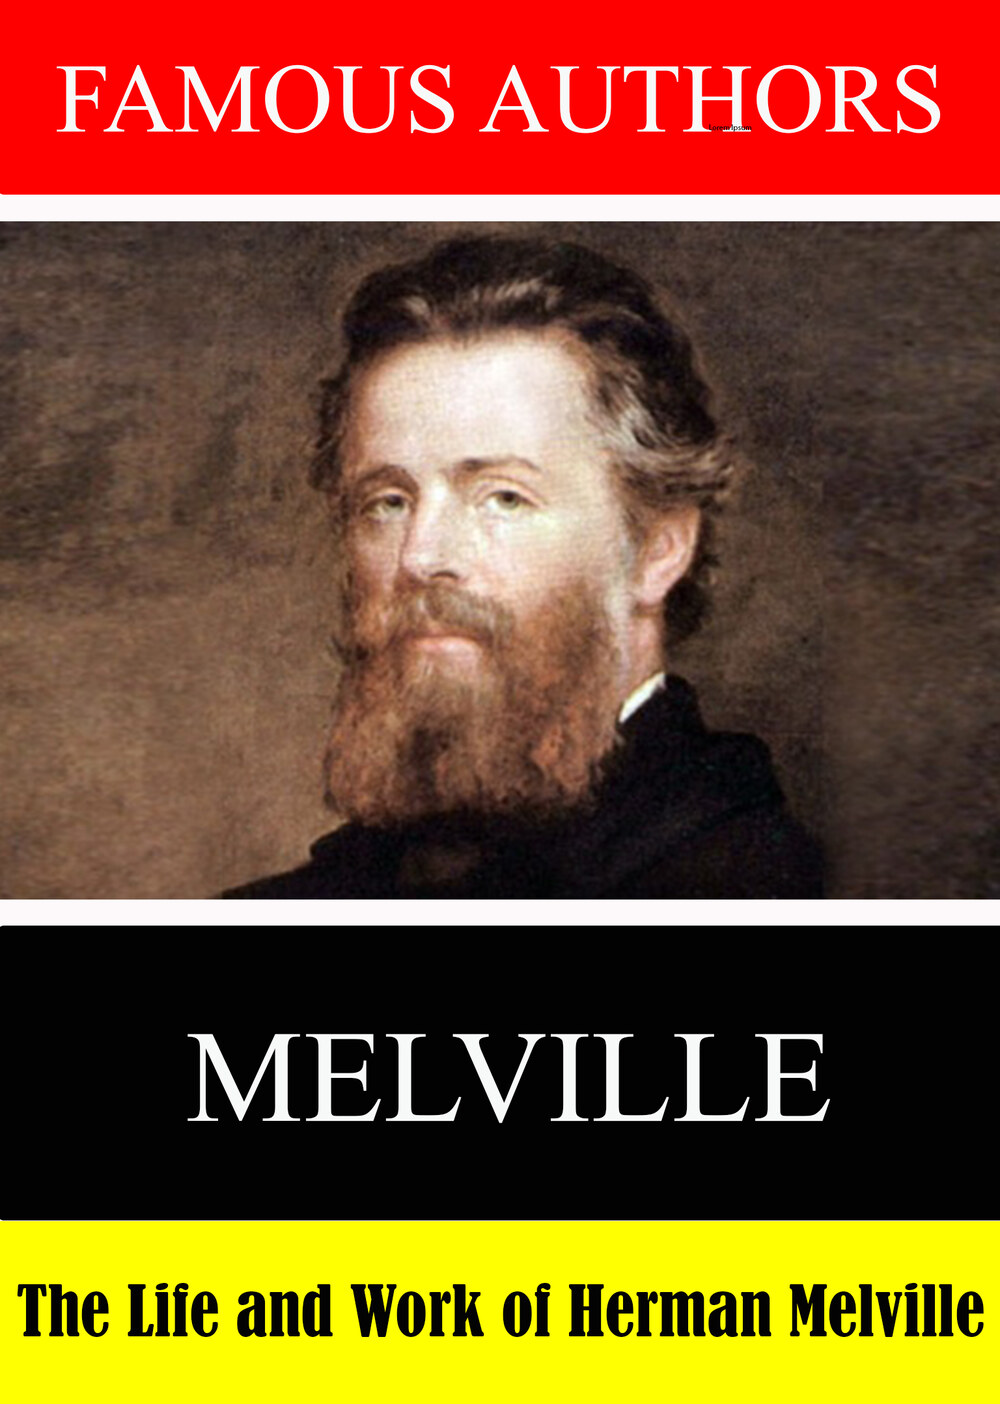 L7897 - Famous Authors: The Life and Work of Herman Melville